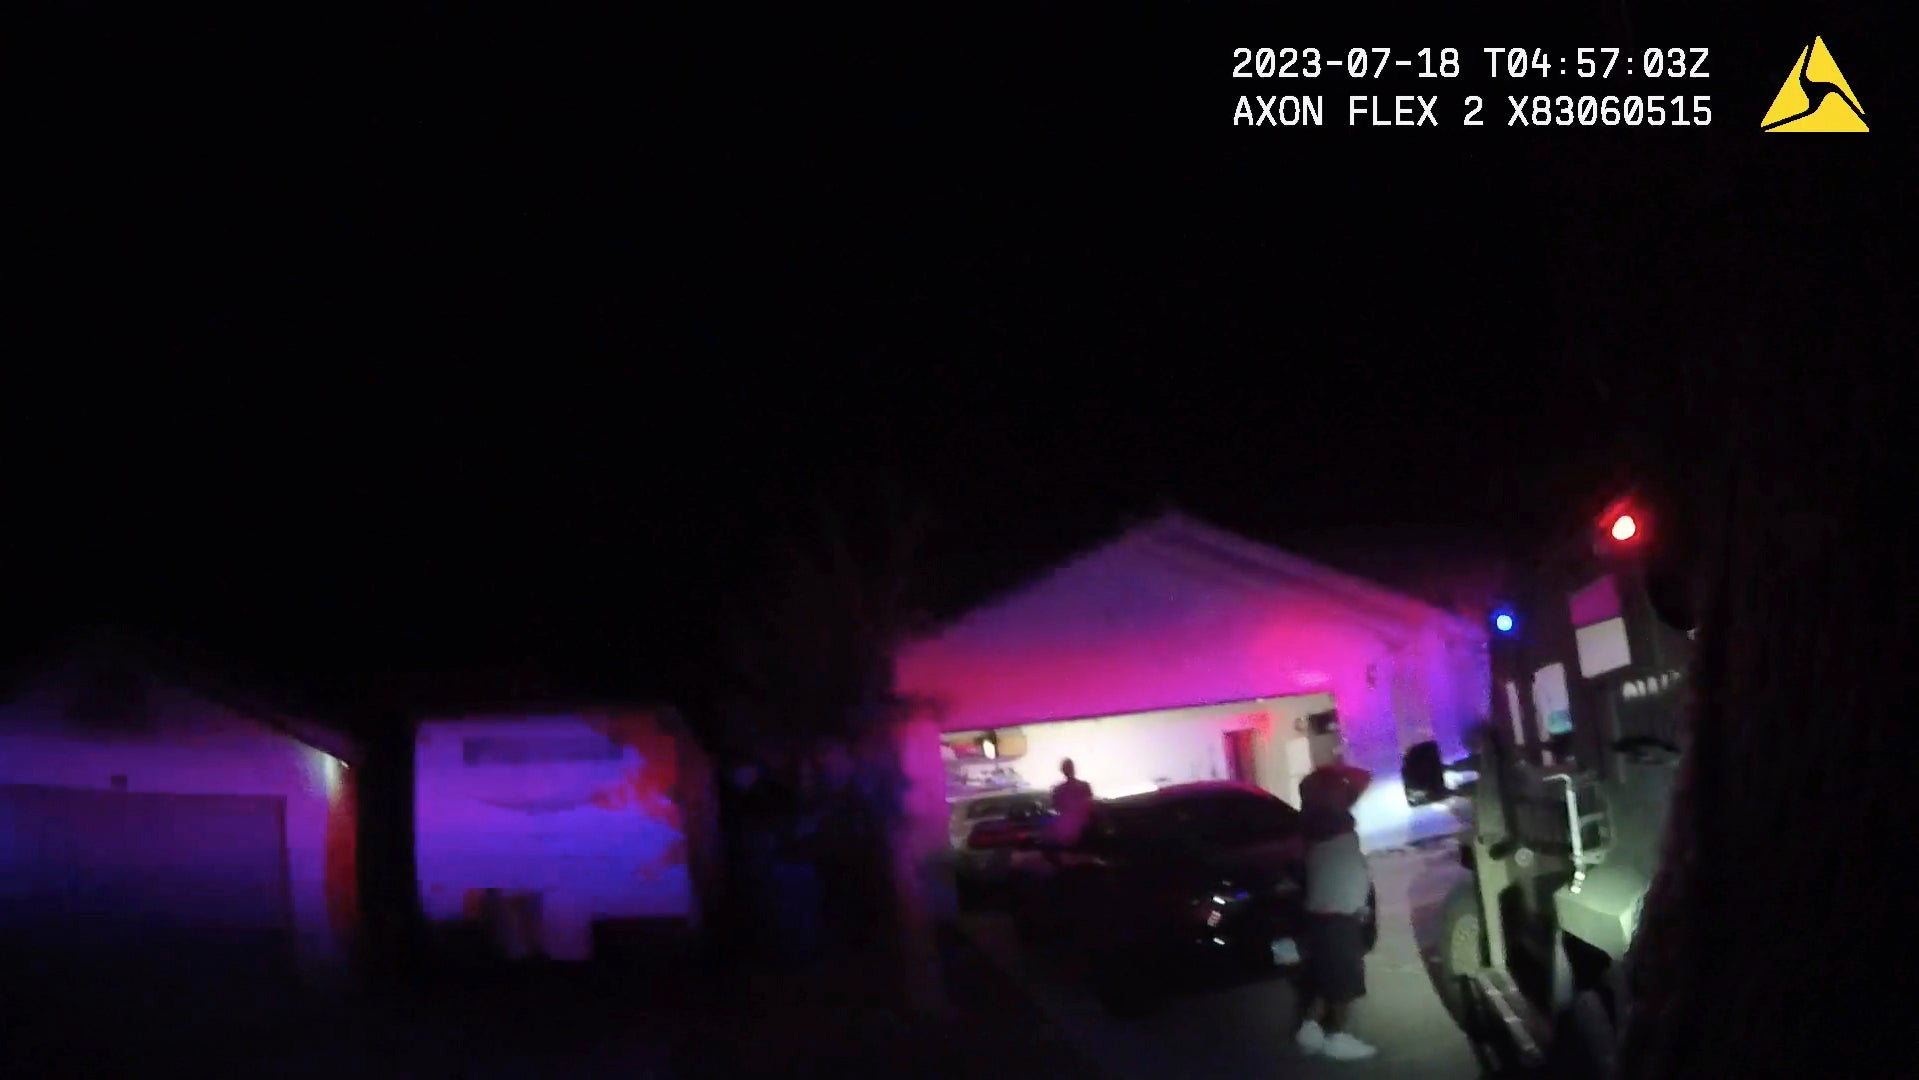 In this Monday evening, July 17, 2023 image taken from police body camera video provided by the Las Vegas Metropolitan Police Department, an unidentified man and woman are seen as SWAT officers raided a home in the nearby city of Henderson, Nev., in connection with the 1997 killing of rapper Tupac Shakur near the Las Vegas Strip.